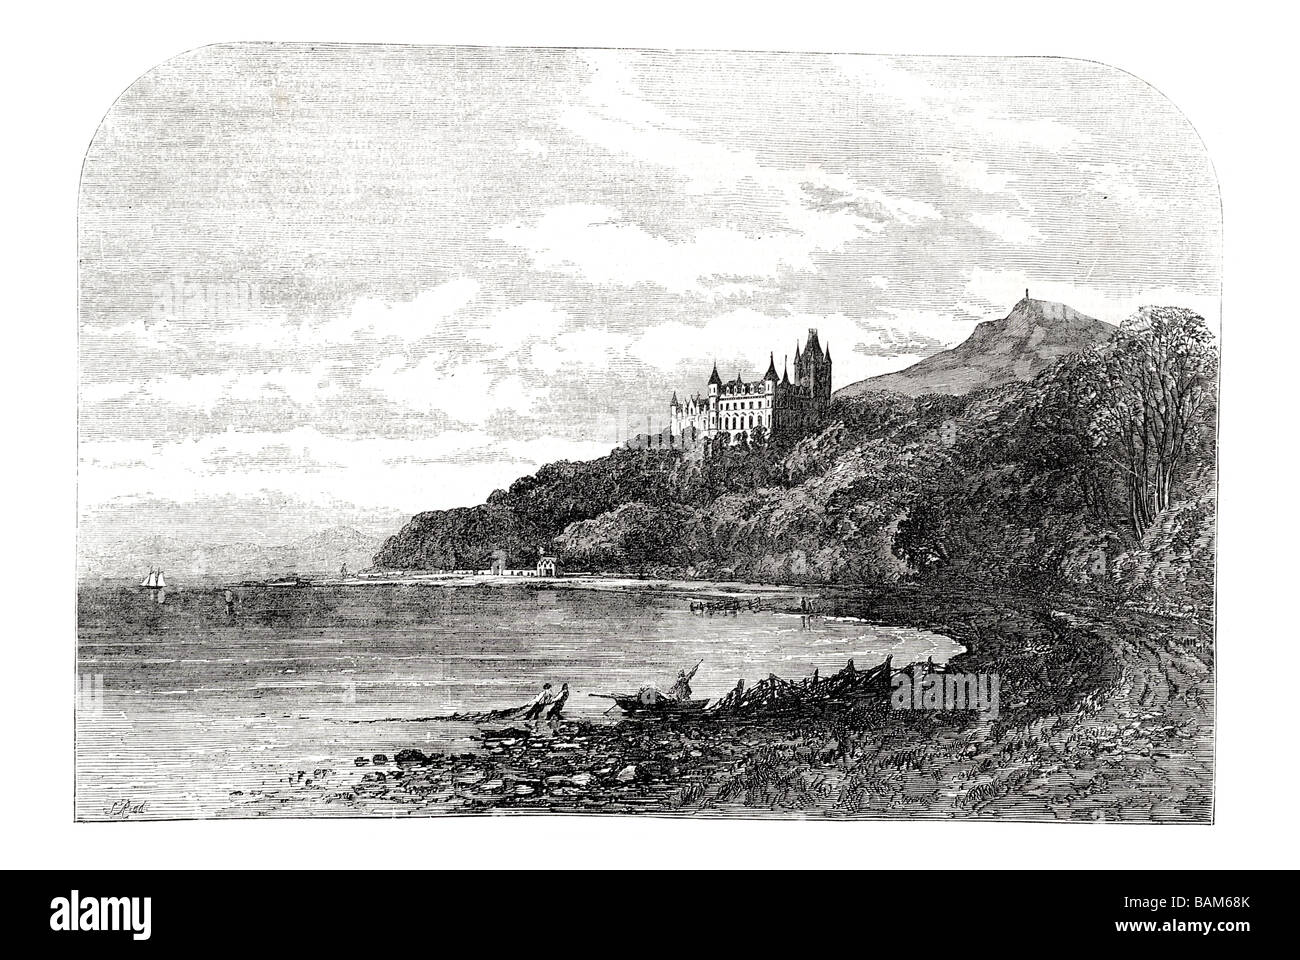 dunrobin castle from the east Sutherland Highland Scotland 1855 medieval clad fairytale Scots Baronial curtain Stock Photo